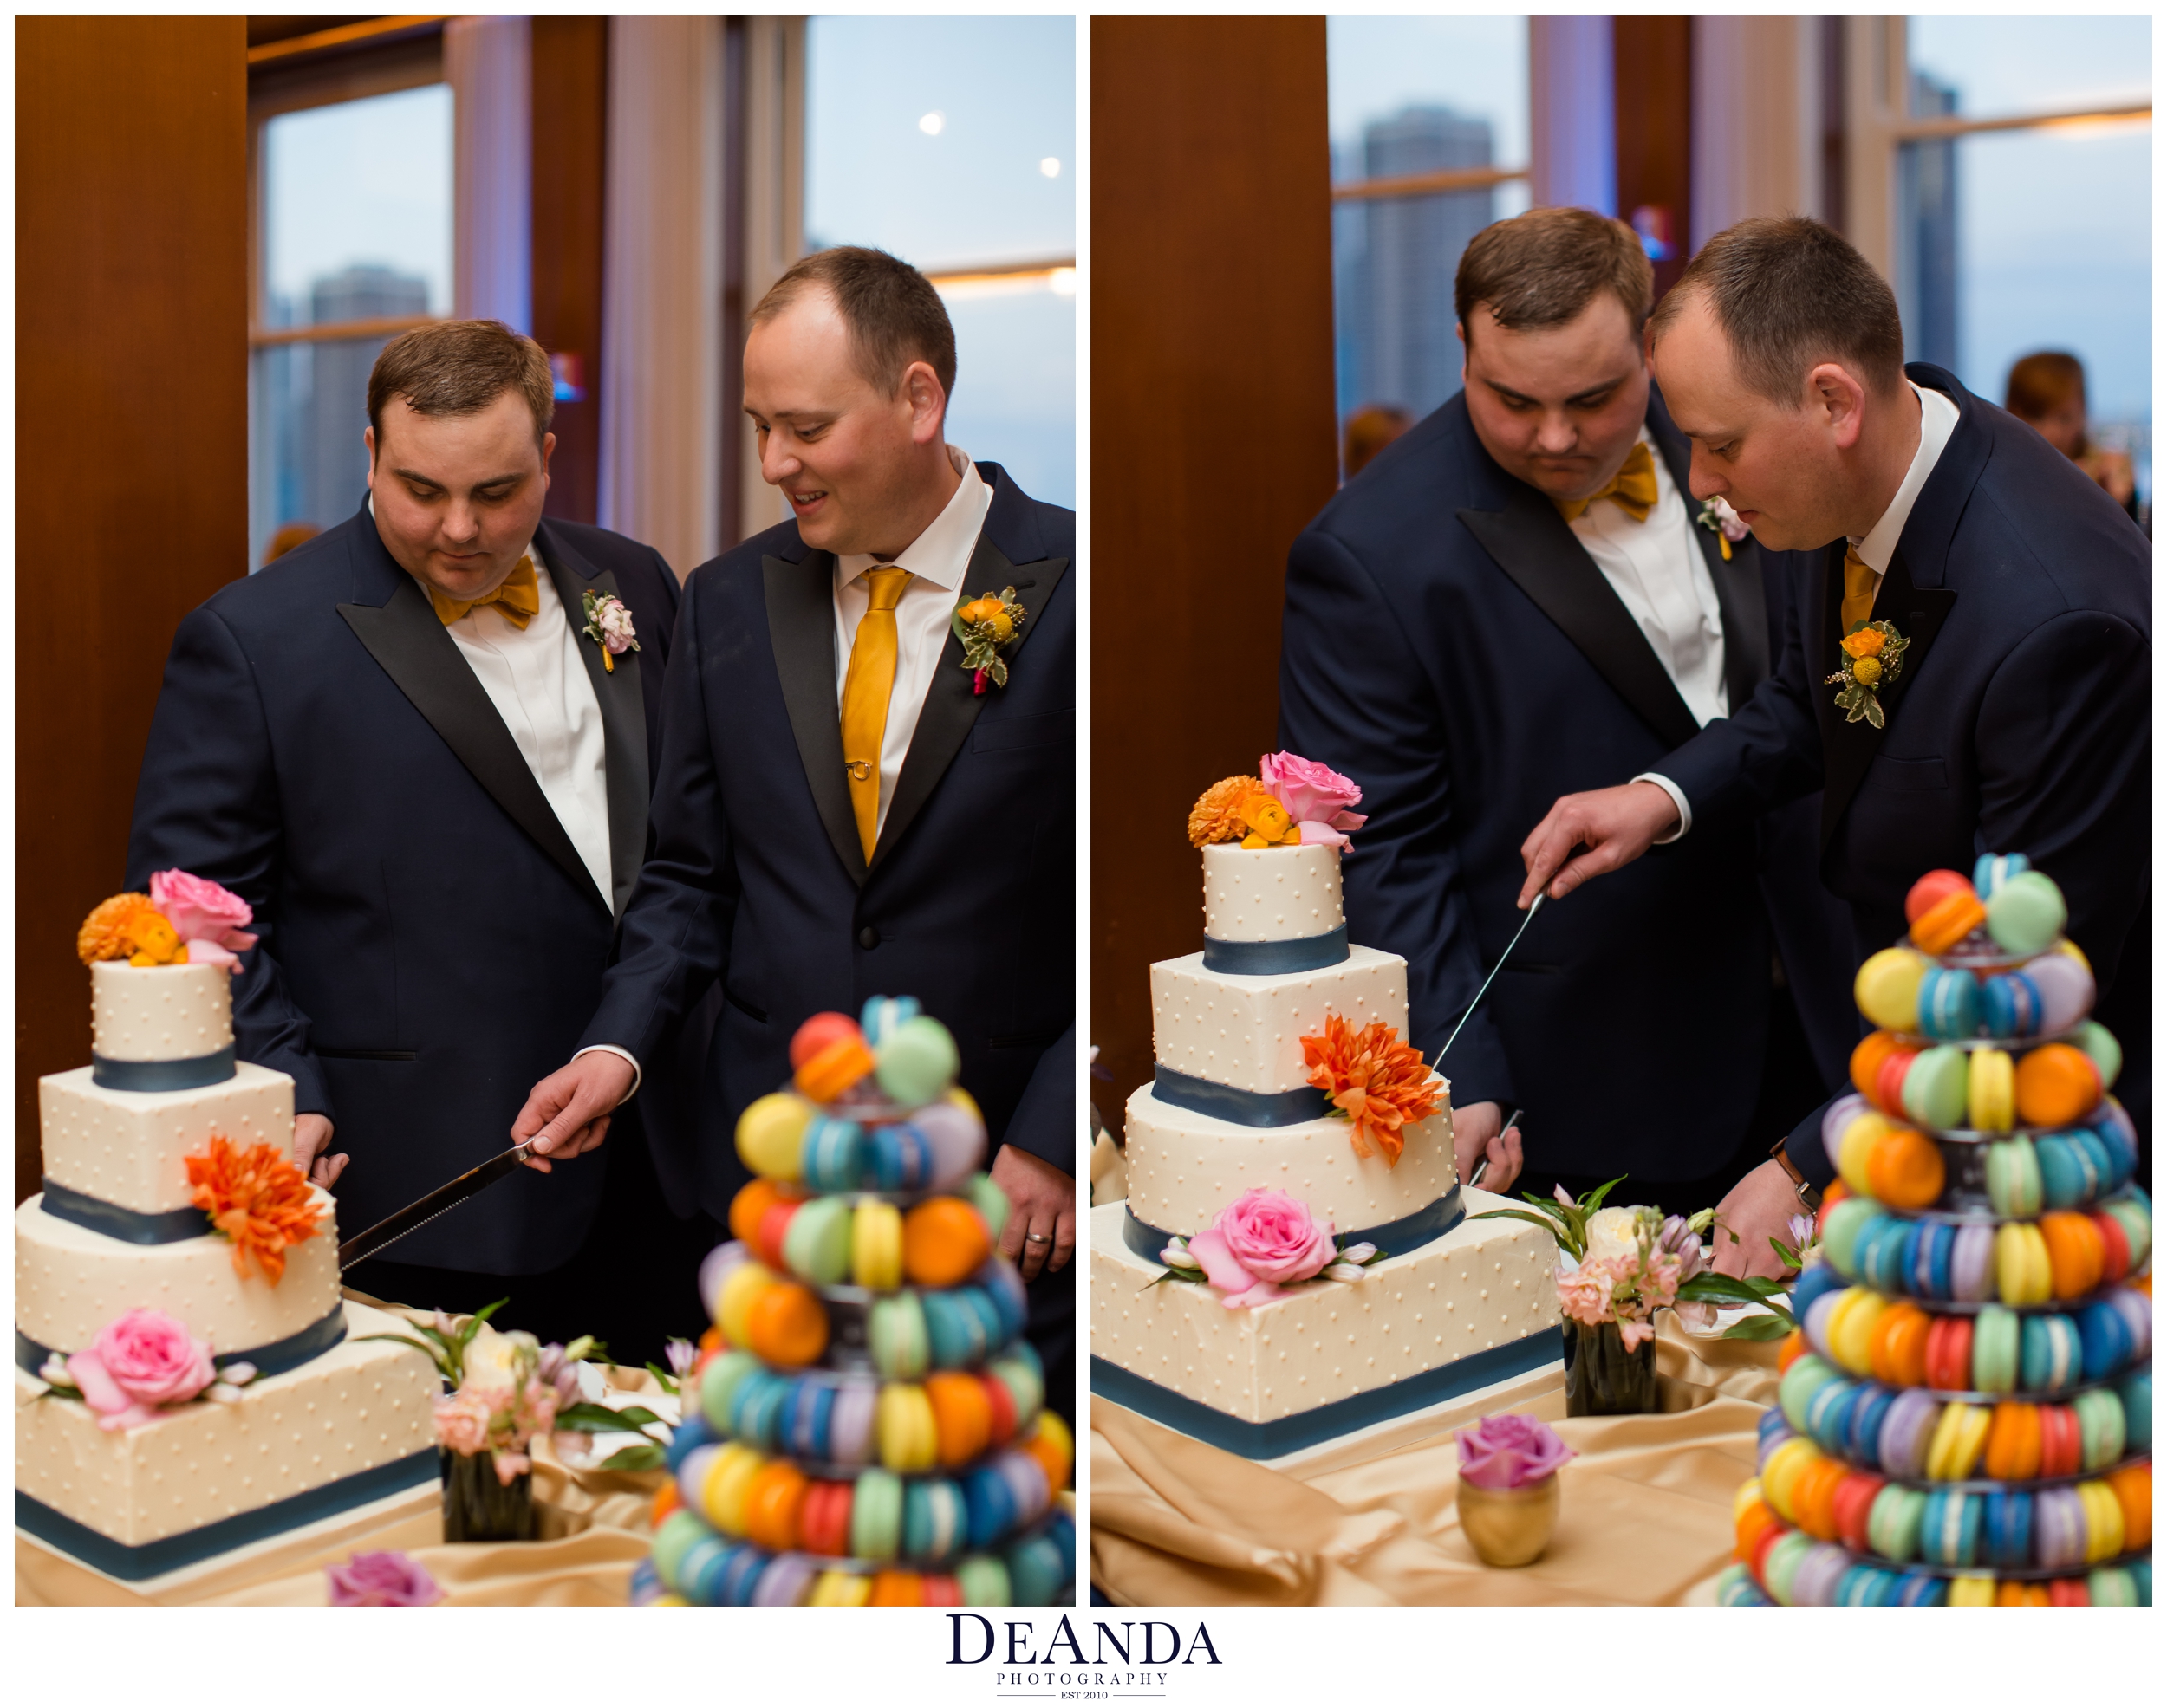 grooms cutting the cake at their weddin